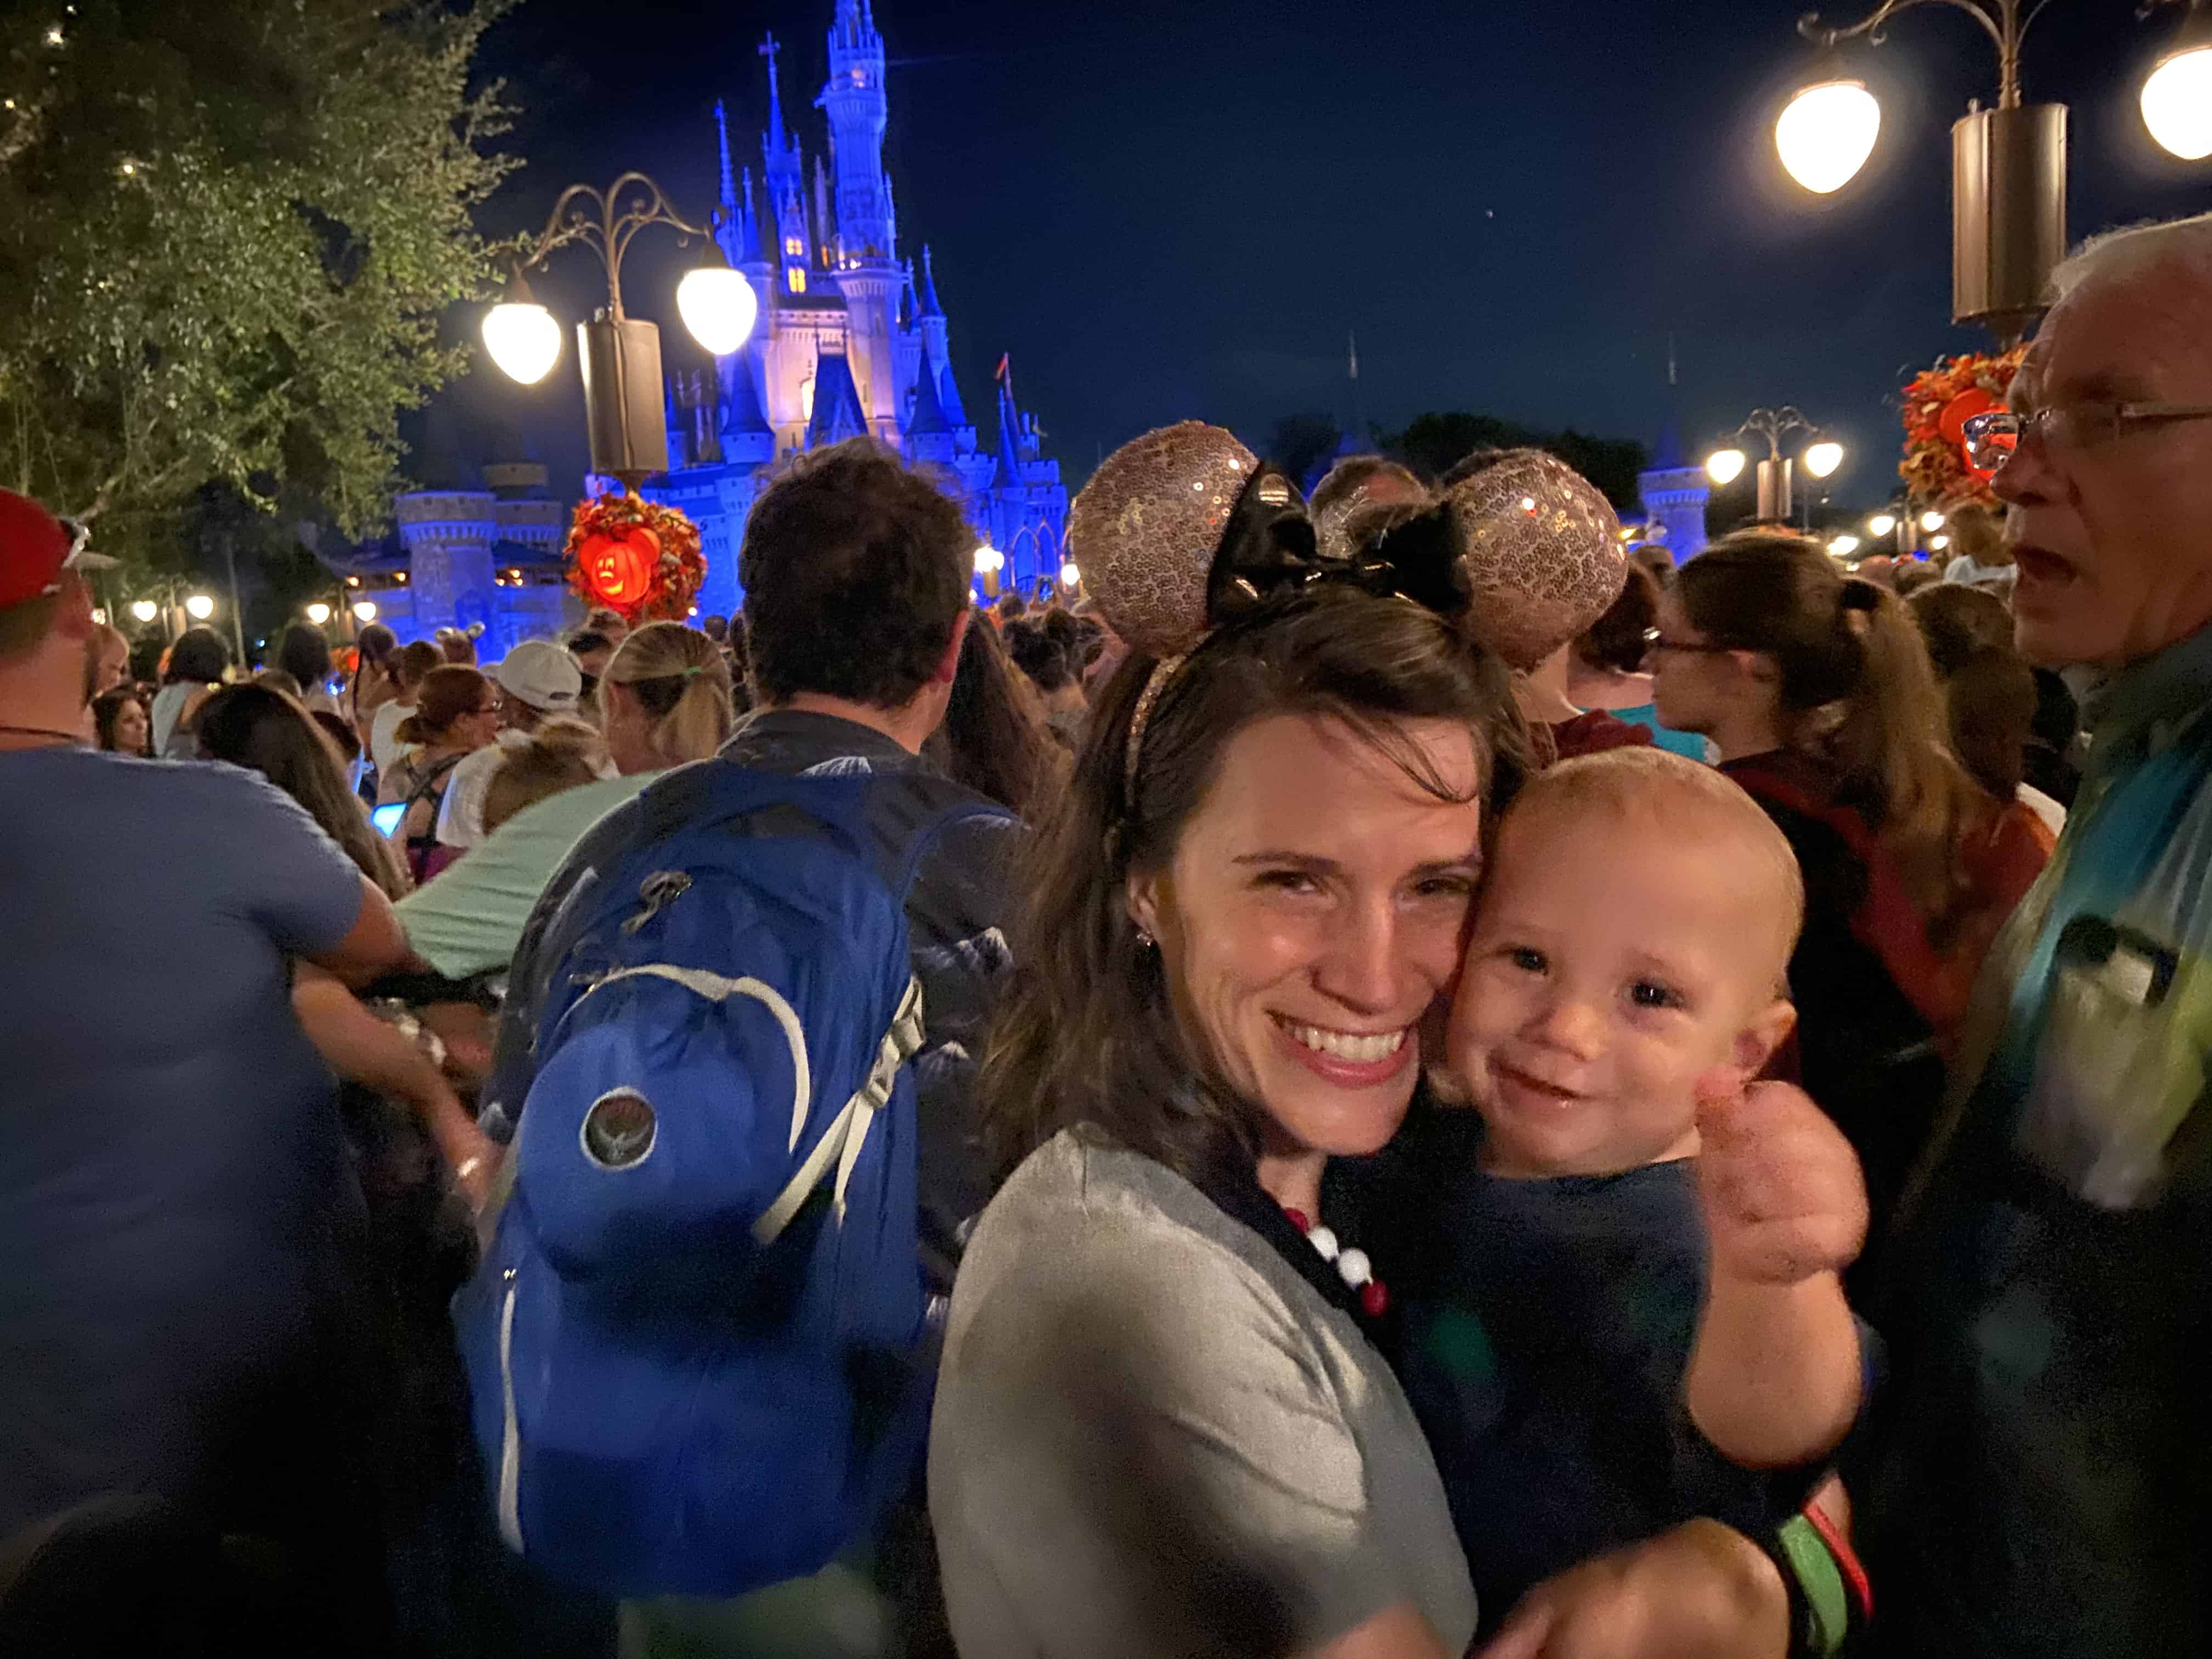 Disney Mom Hack: Be comfortable and wear the ears!